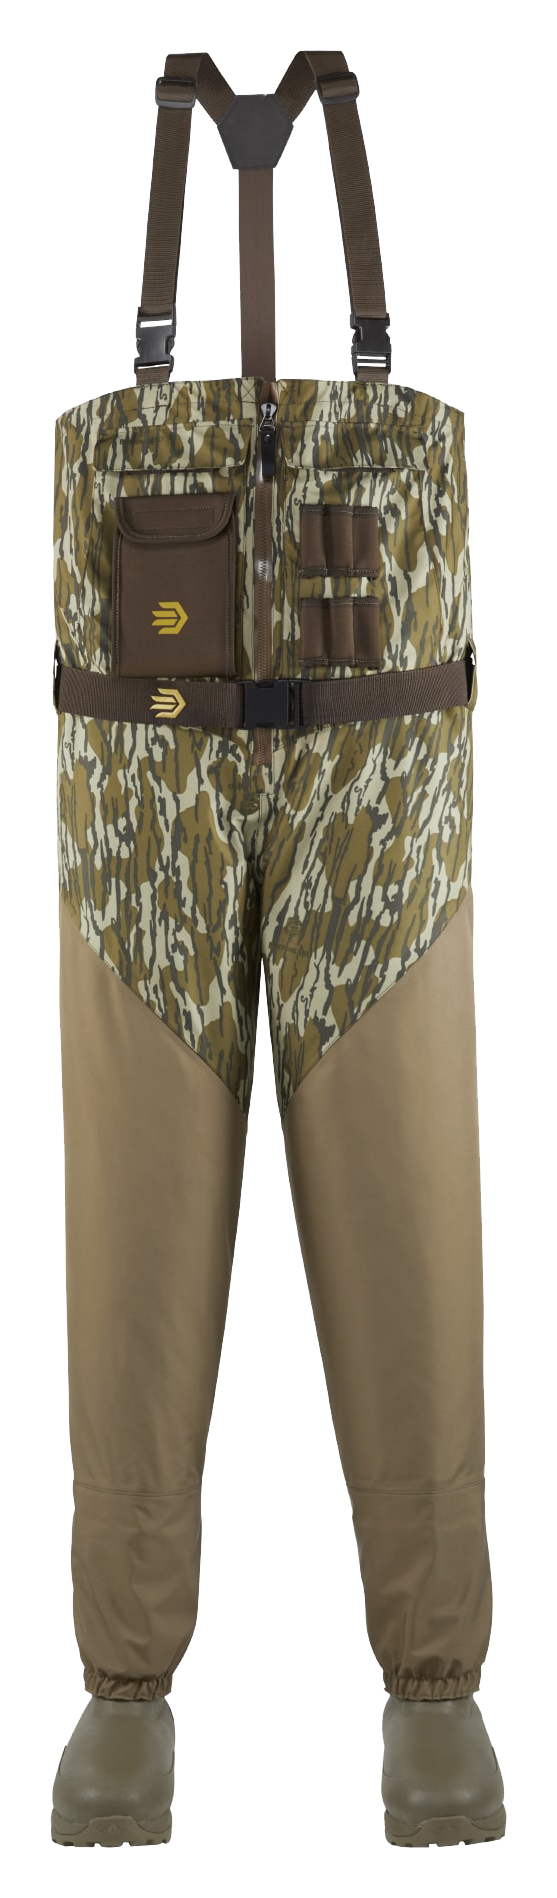 LaCrosse Alpha Agility Select Insulated Front-Zip Breathable Hunting Waders for Men - Mossy Oak Original Bottomland - 12/Medium